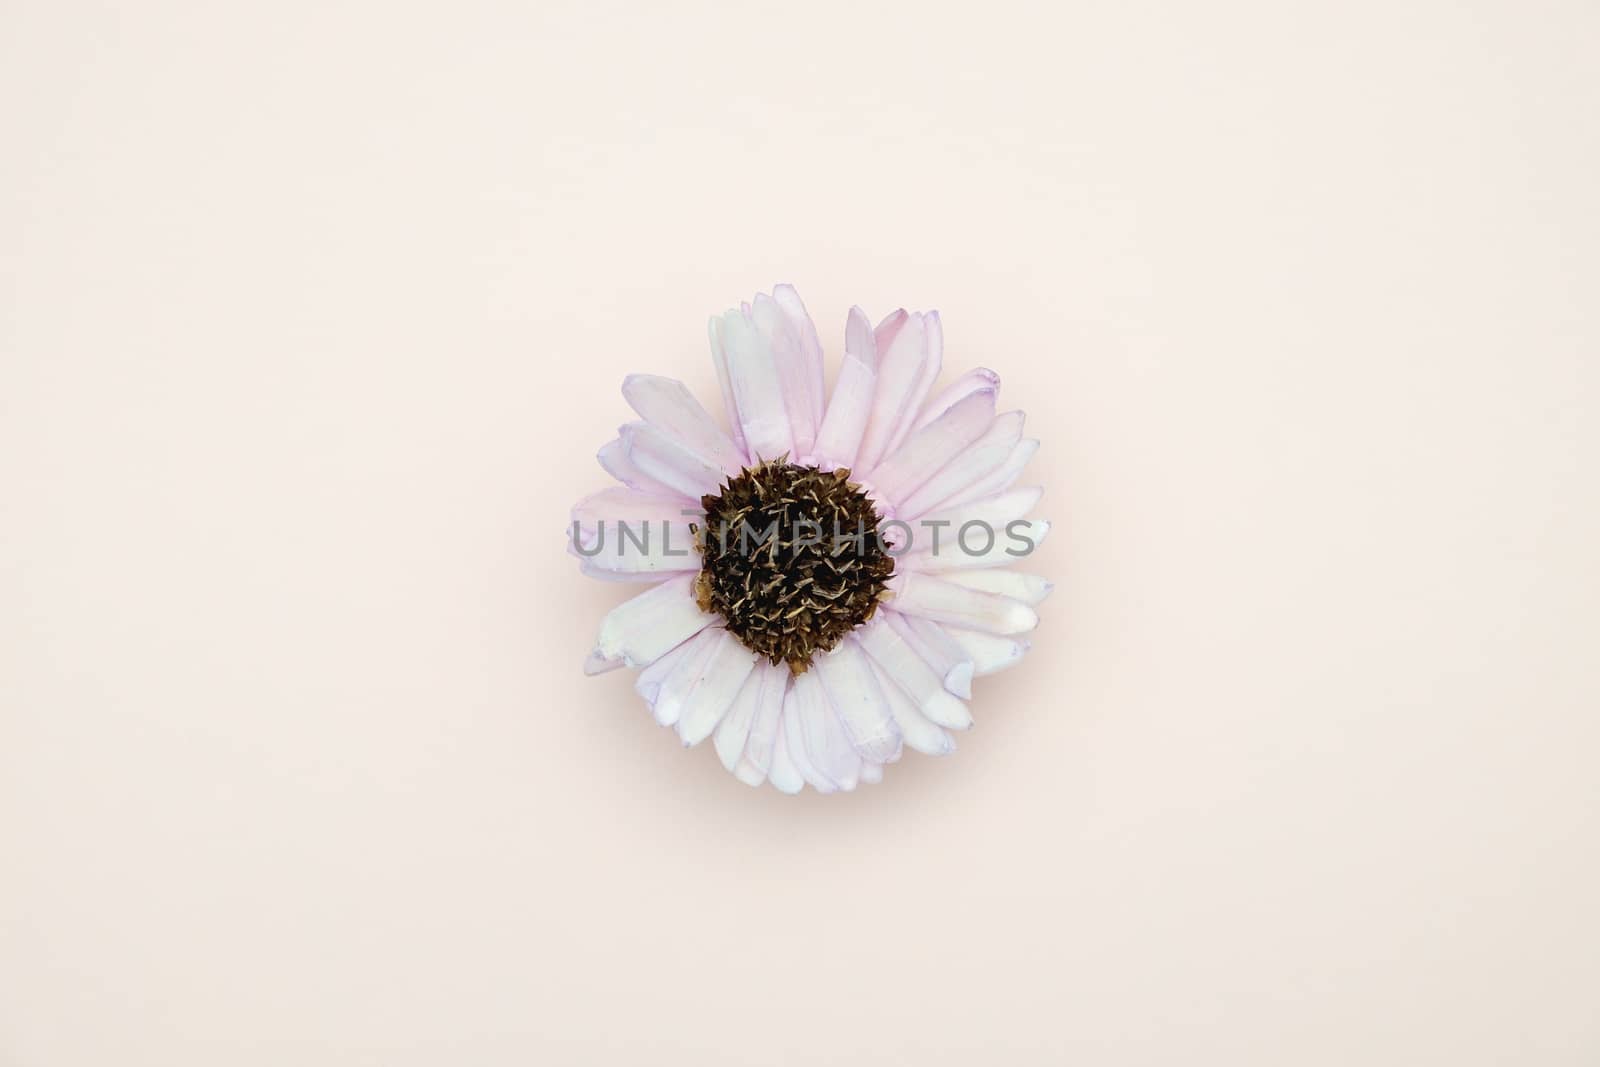 Flower on pink background with valentine concept.